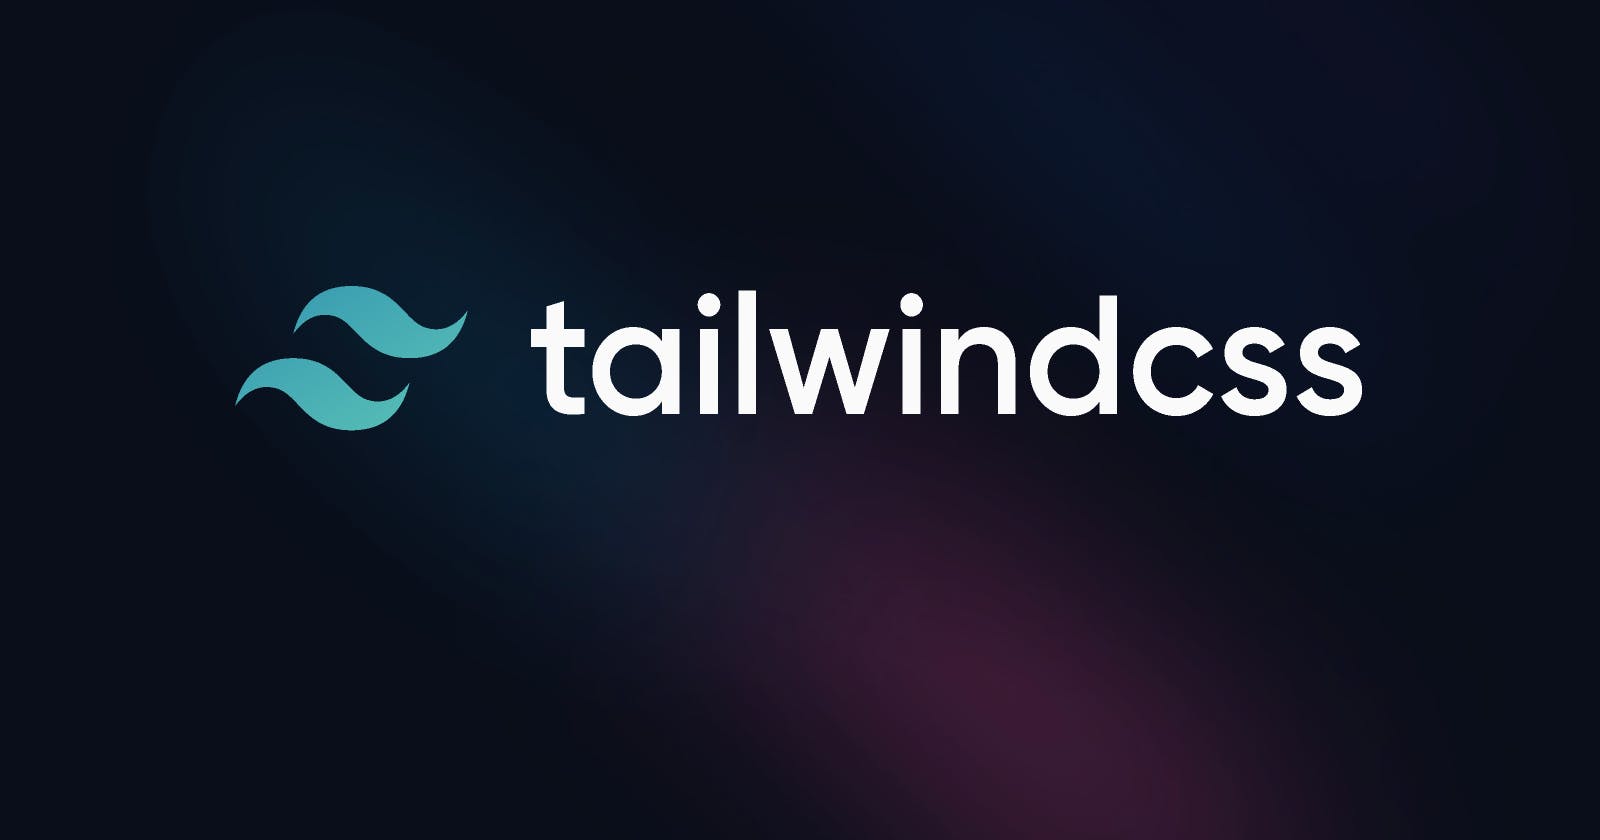 Introduction to Tailwind CSS: A Utility-First Way to deal with Styling